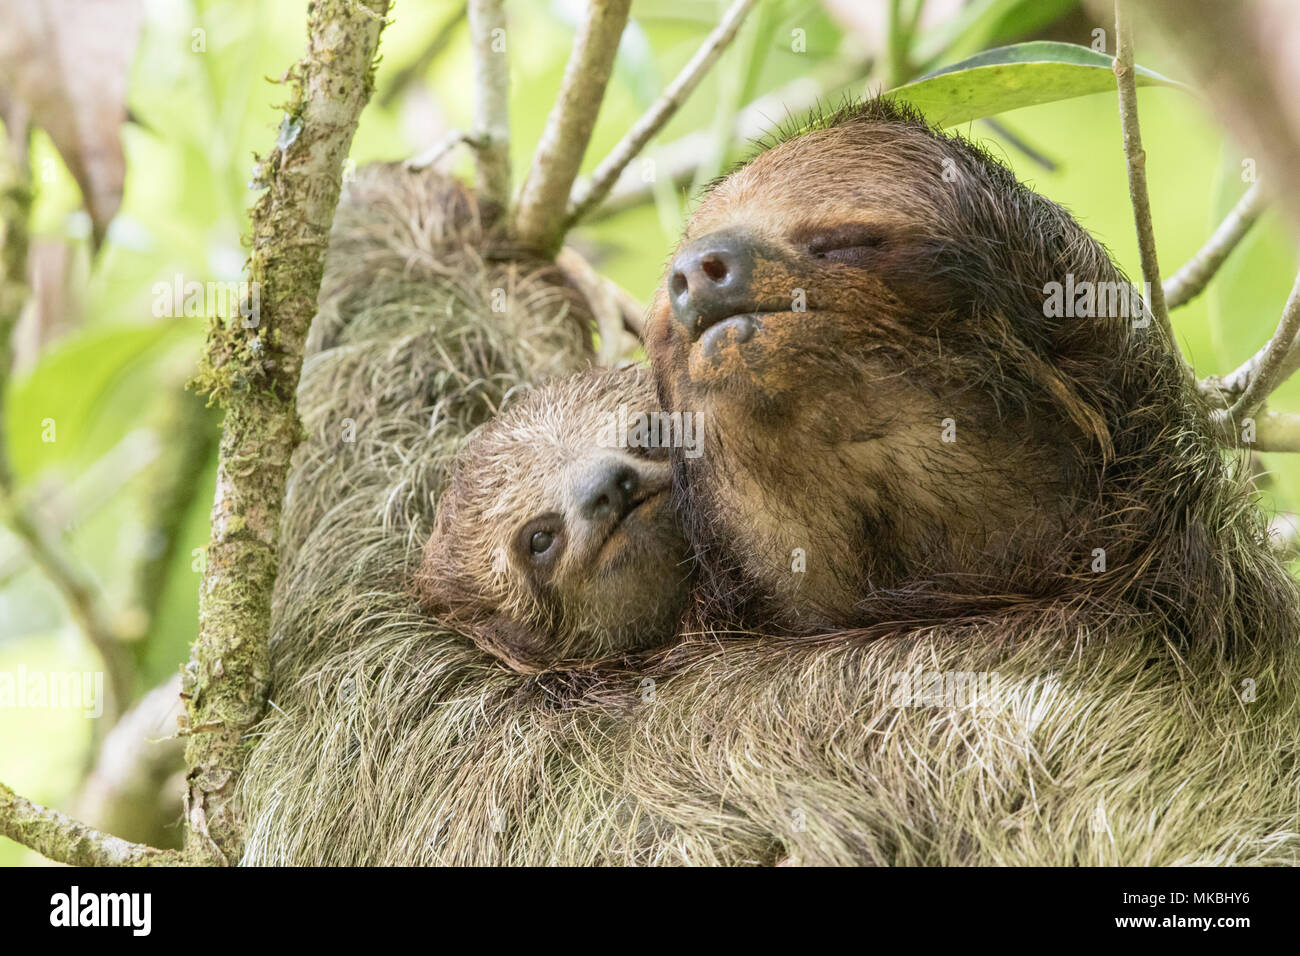 brown-throated sloth or three-toed sloth Bradypus variegatus adult female and baby resting on tree branch in Costa Rica Stock Photo